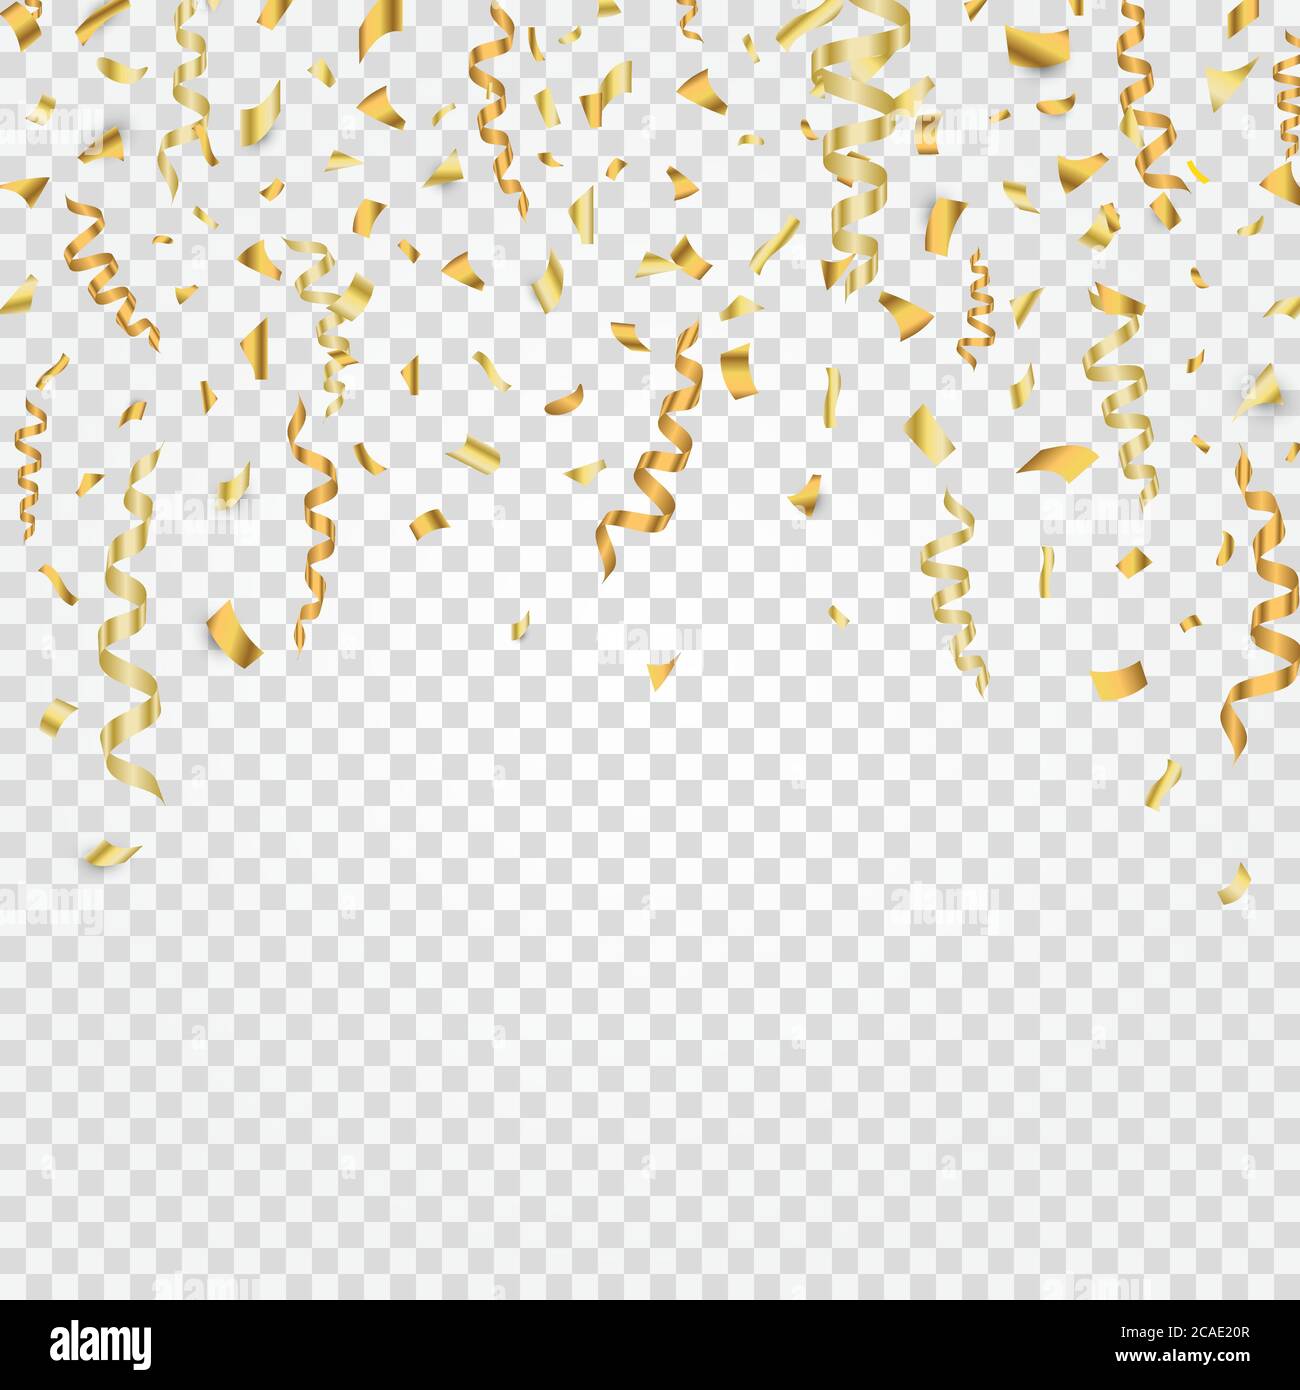 Gold confetti background. Party background Vector illustration. Stock Vector